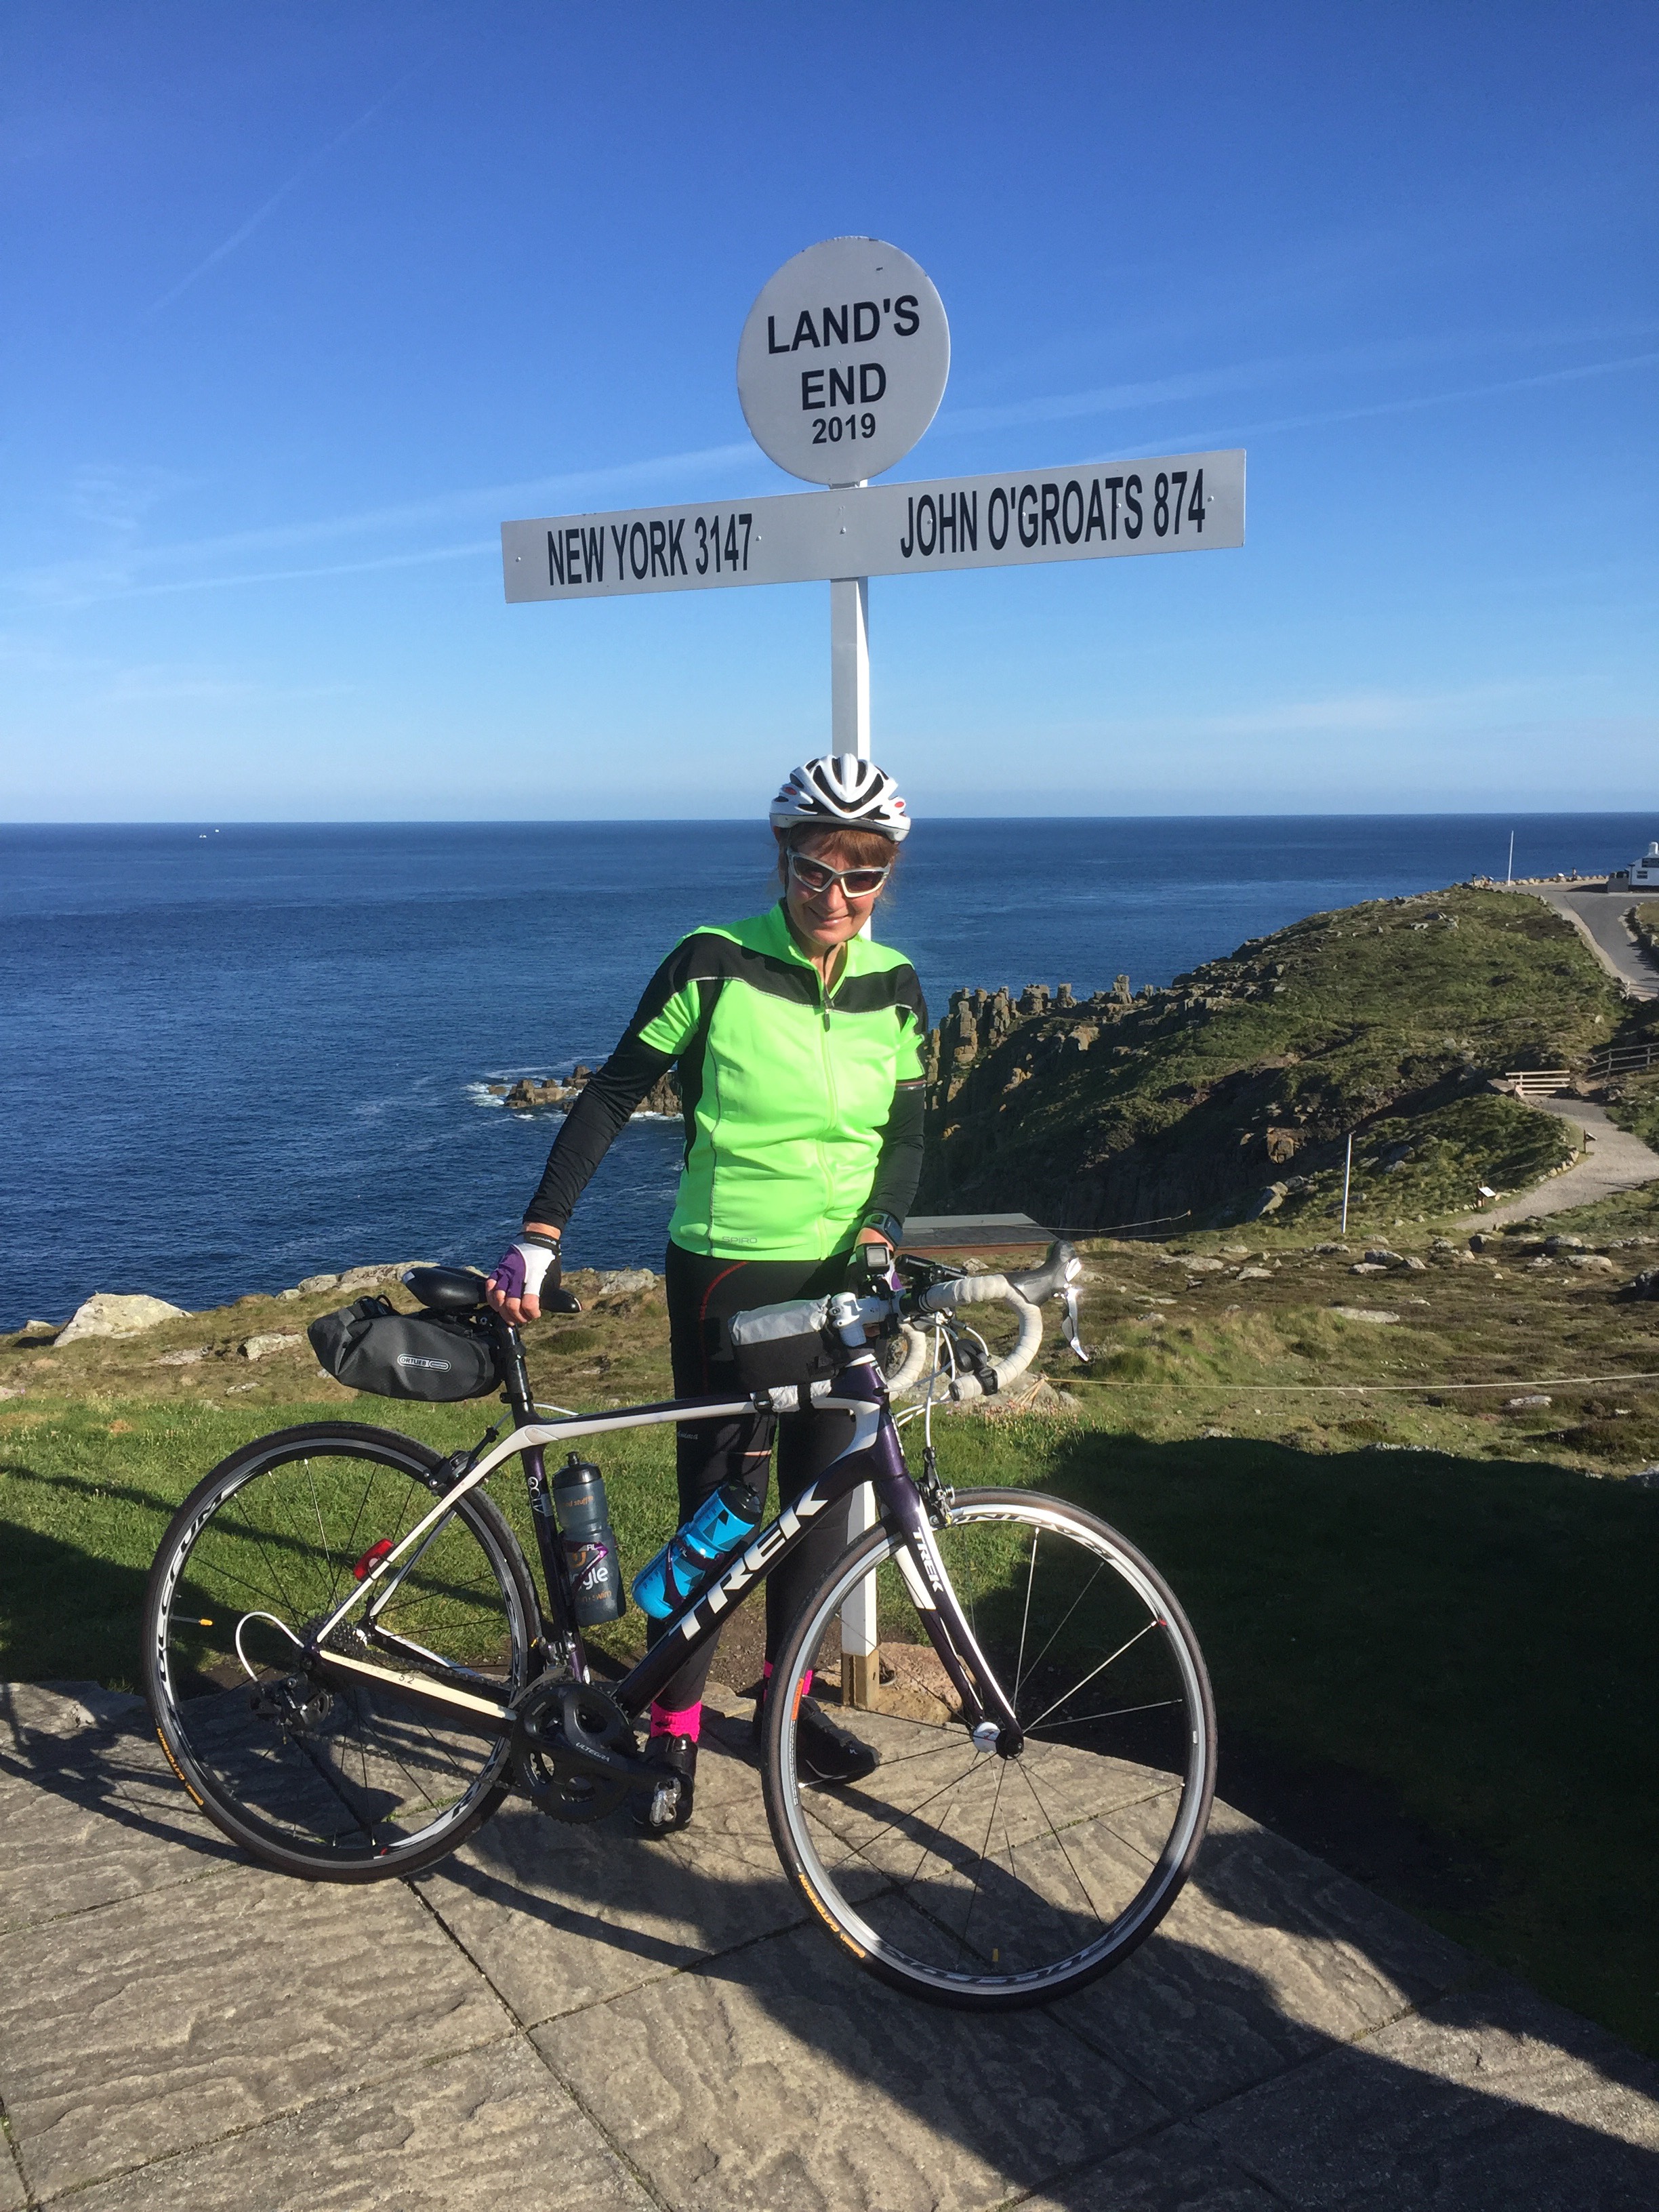 Jacky on her bike at Lands End on her way to John O'Groats